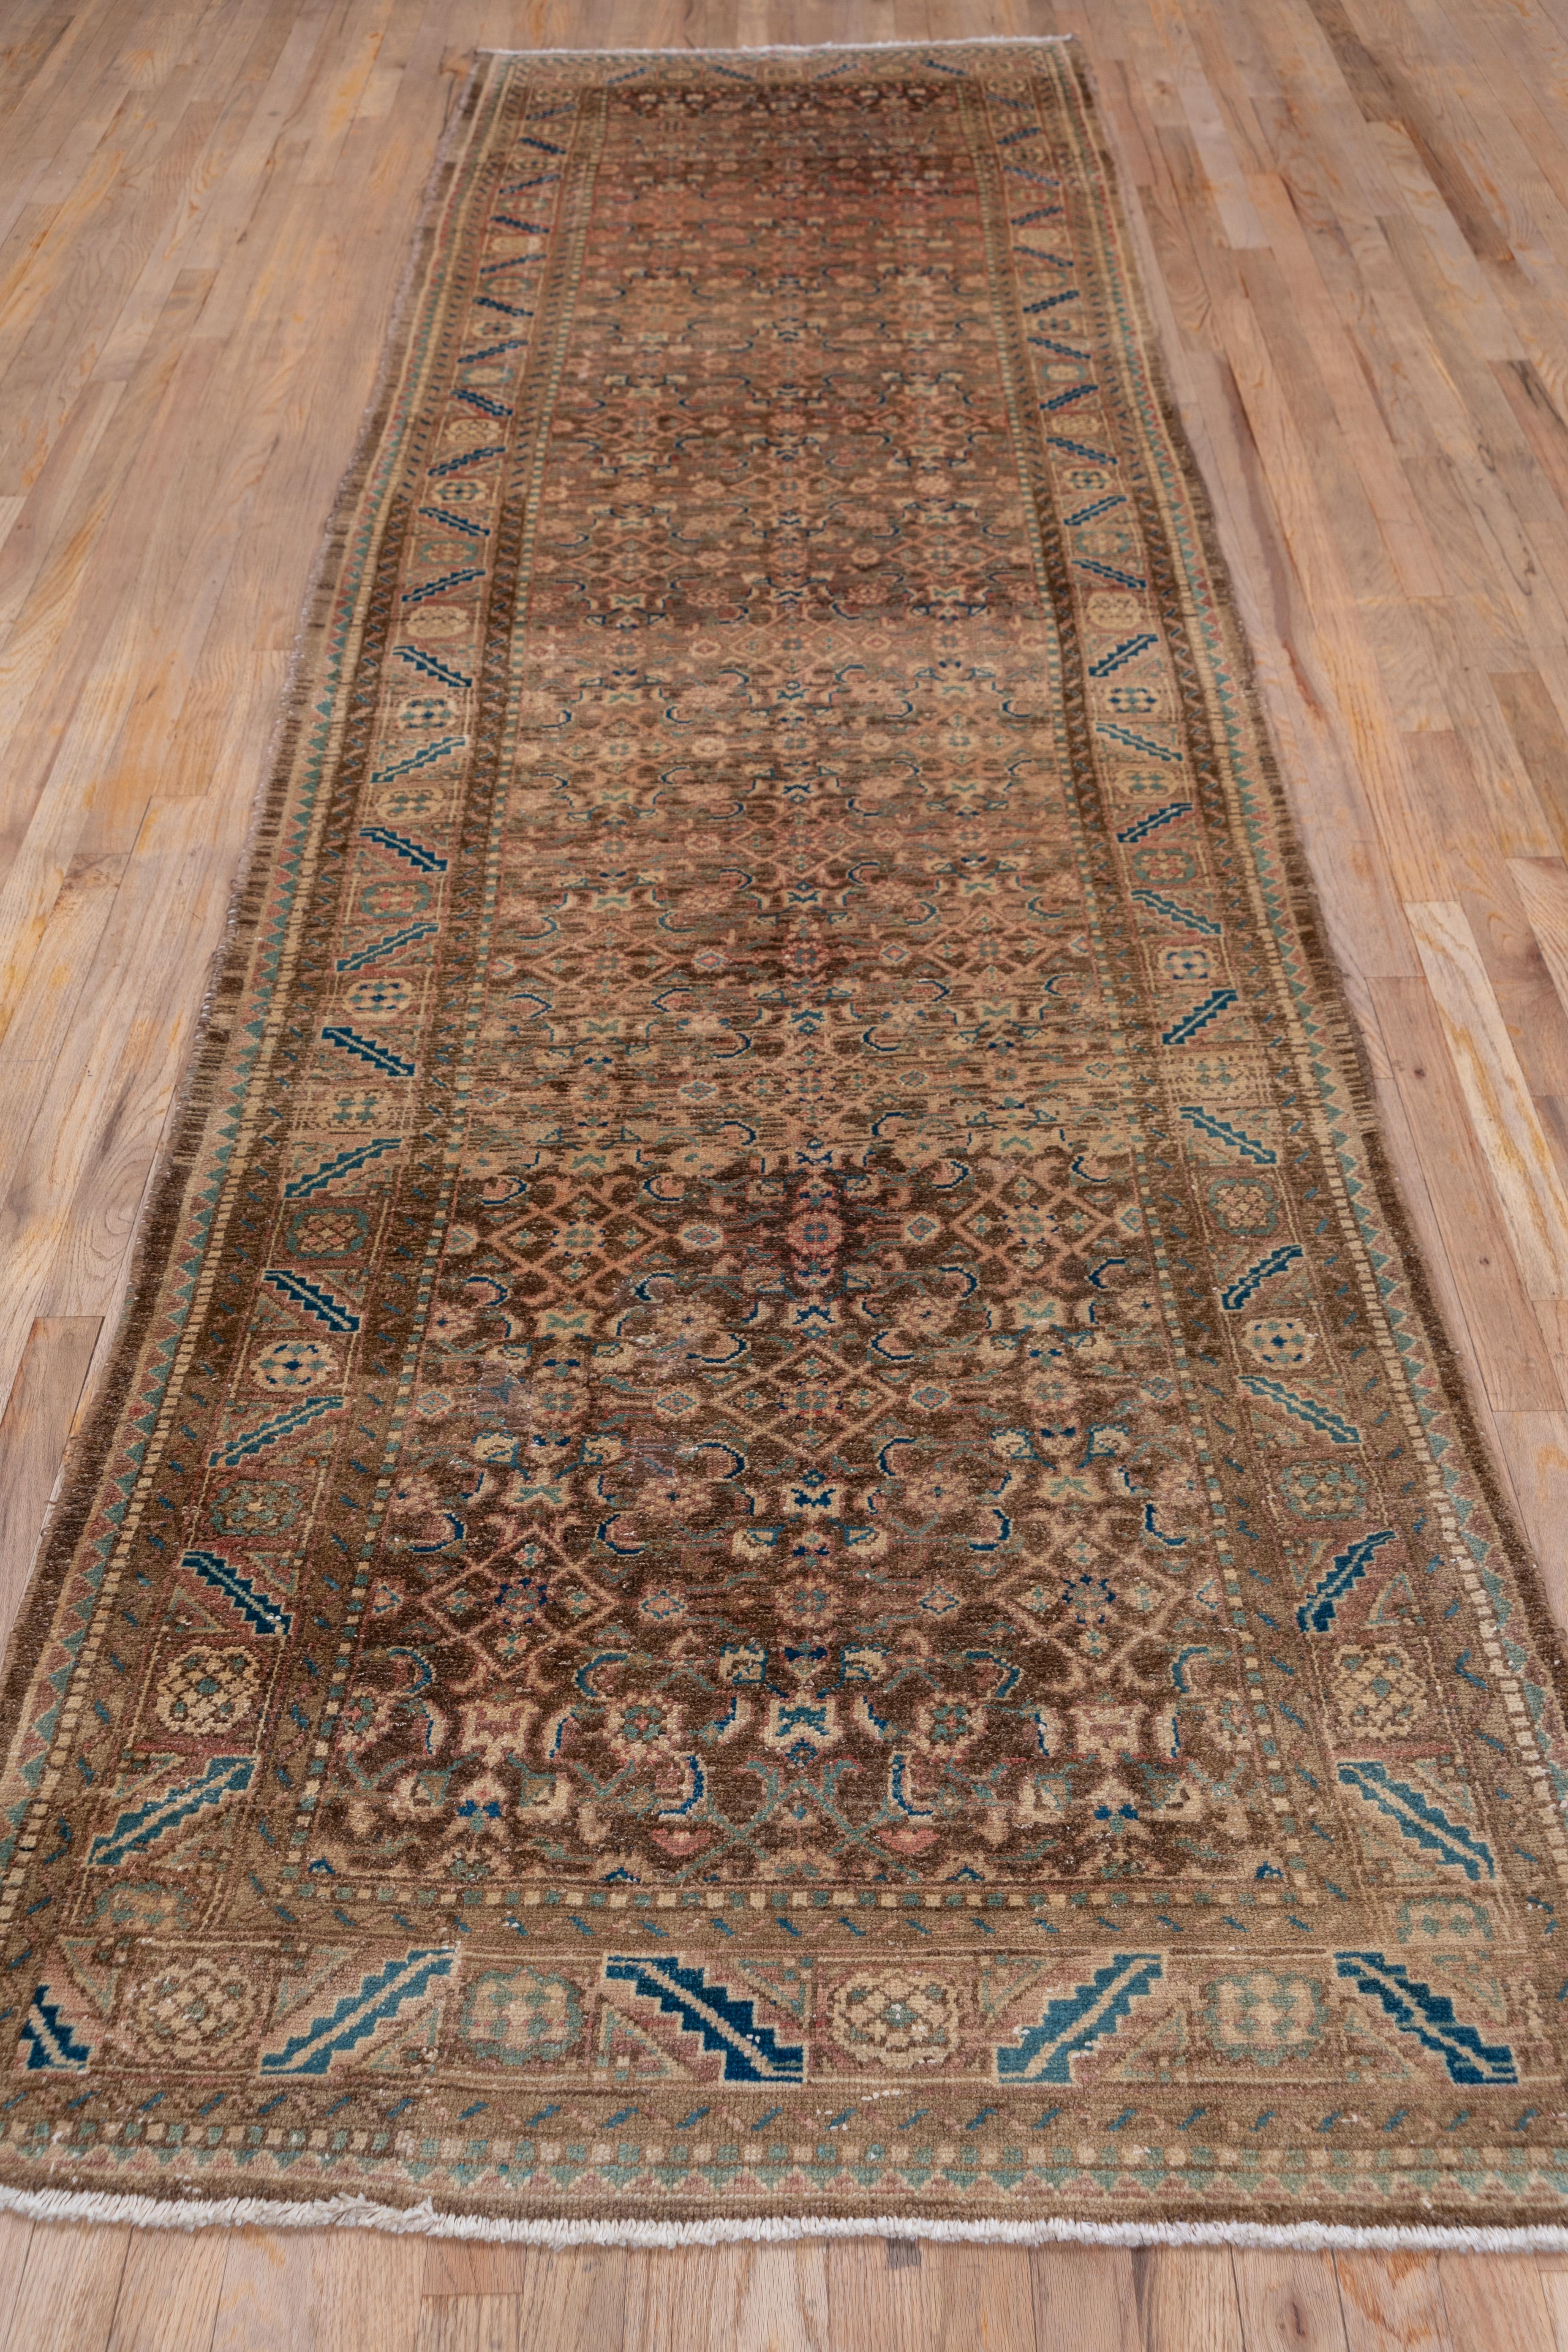 The red-brown ground supports an offset three column Herati pattern detailed in old ivory and dark blue. Teal and dark blue serrated slant leaves flank mosaic pattern rosettes.